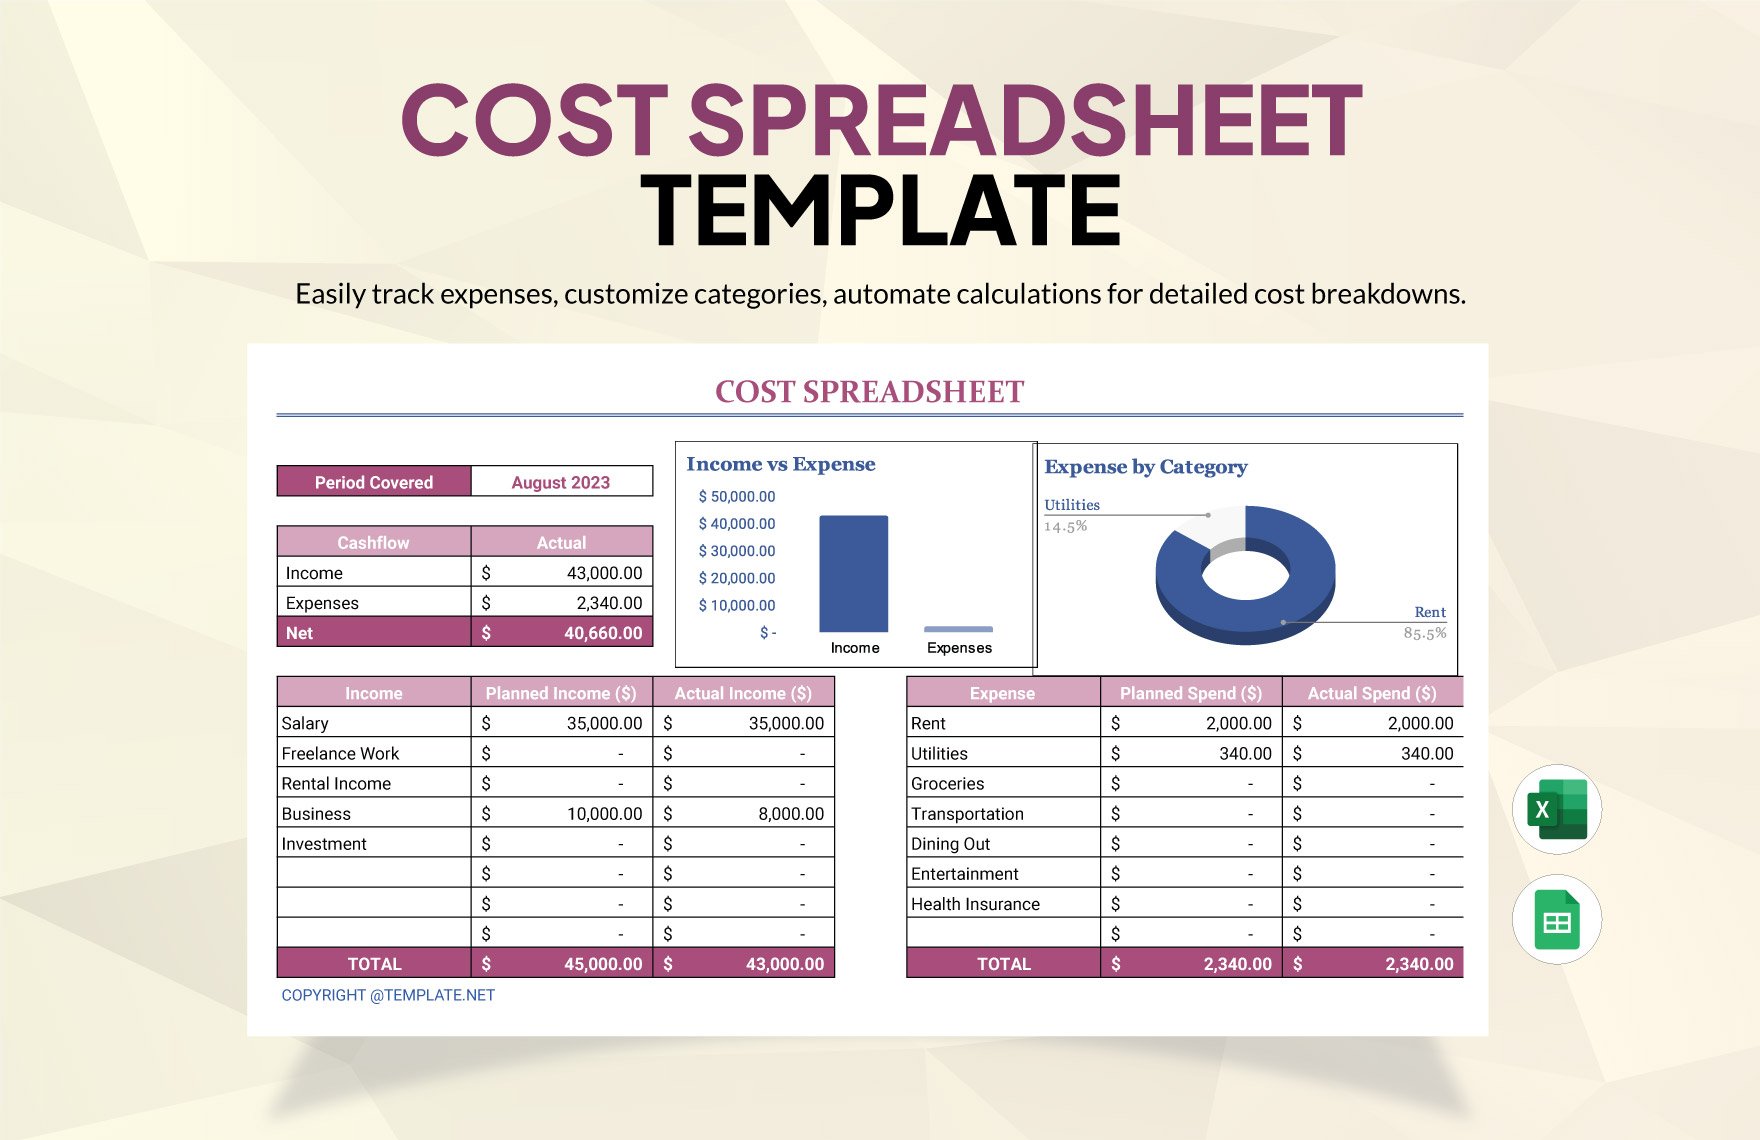 Cost Spreadsheet in Excel, Google Sheets